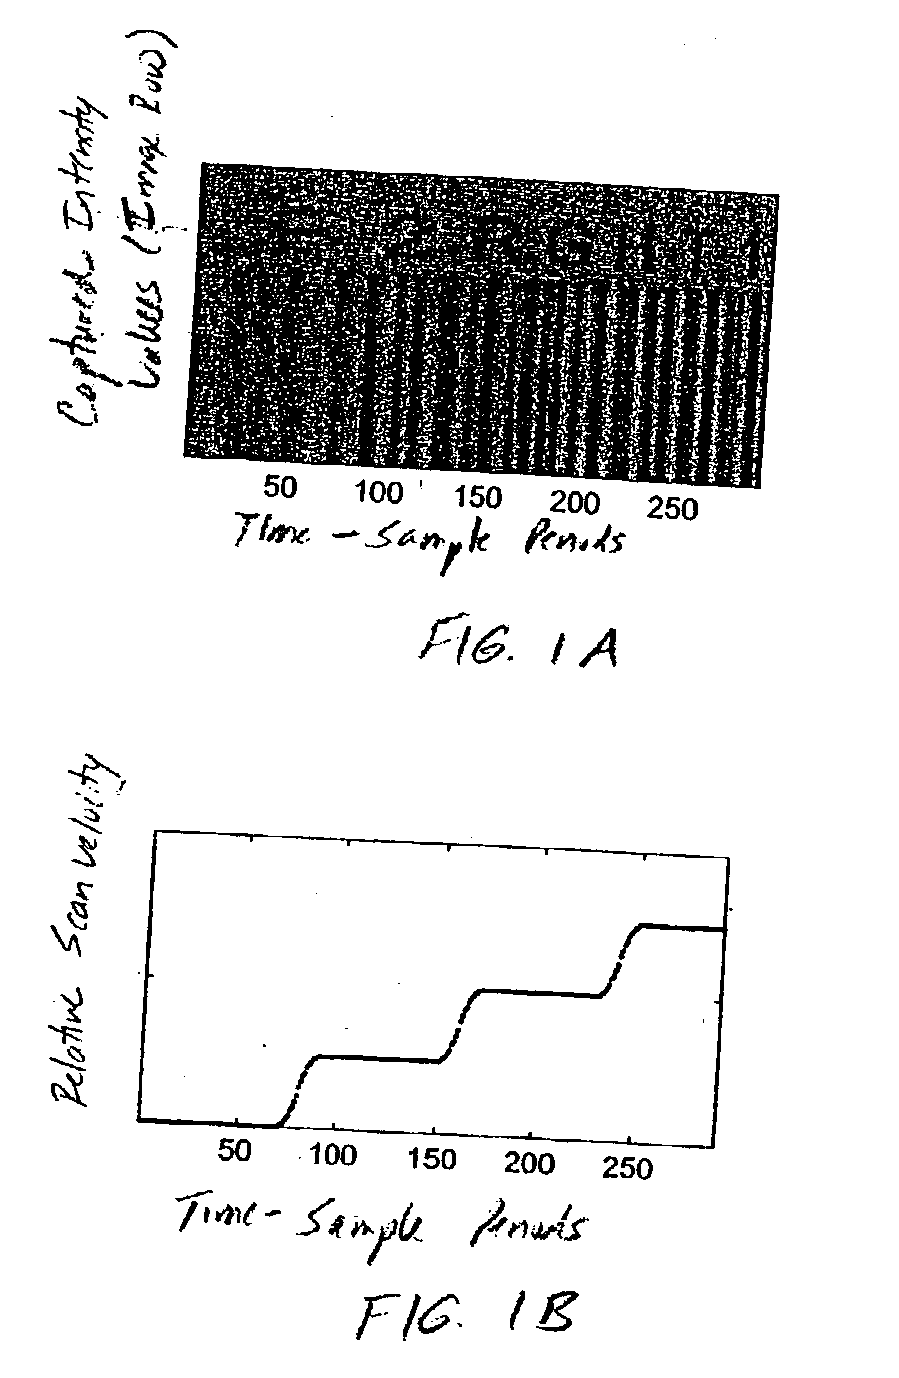 Planar light illumination and linear imaging (PLILIM) device with image-based velocity detection and aspect ratio compensation